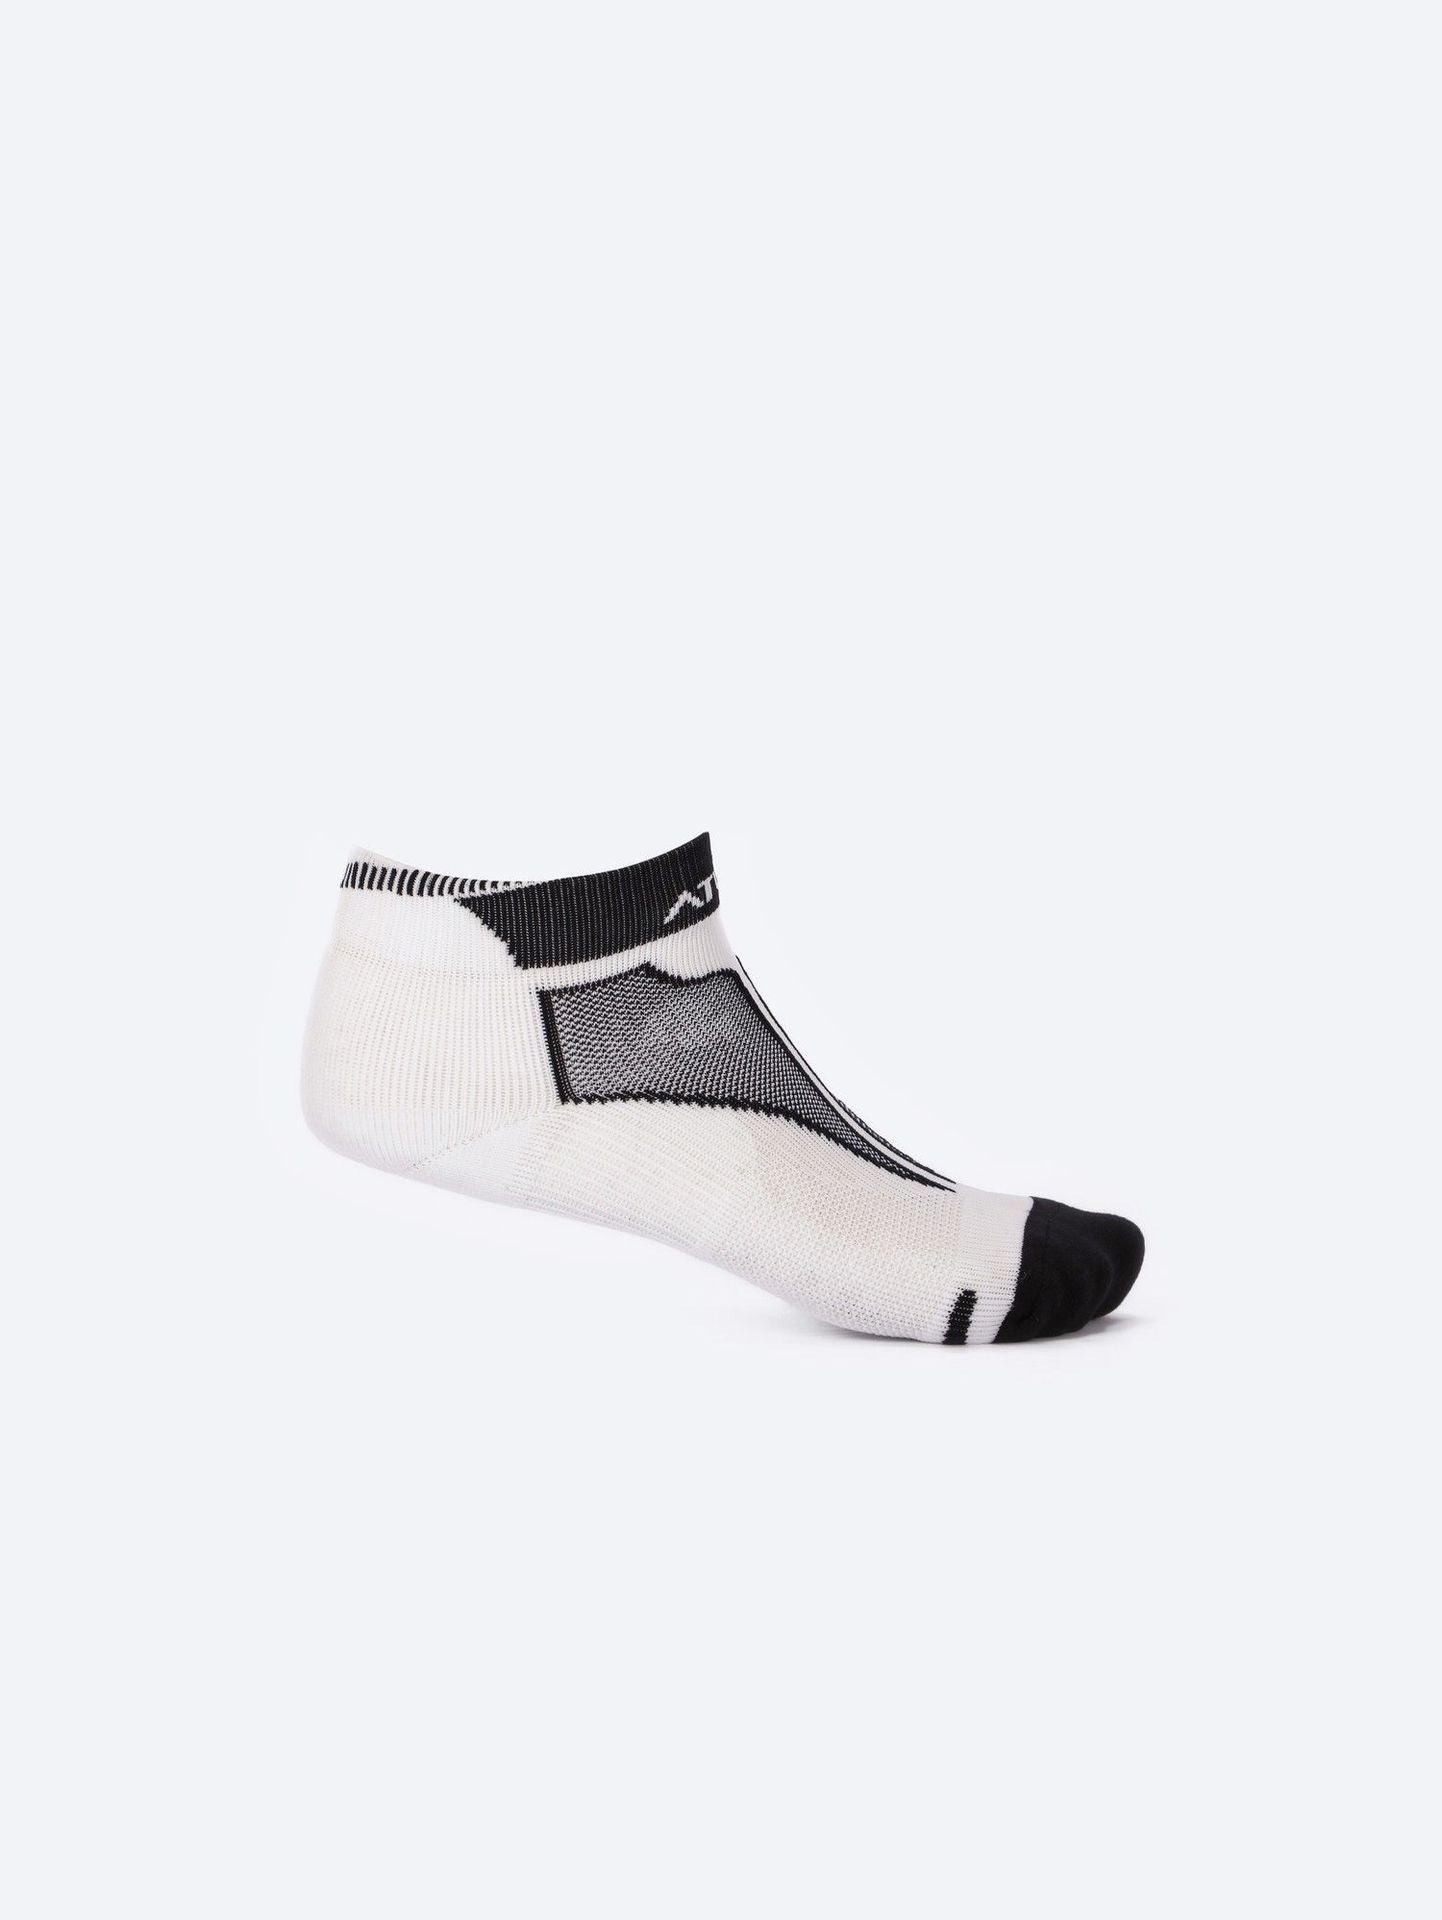 Photo by 𝗔𝗧𝗨𝗠 SPORTSWEAR ® on December 26, 2022. May be of g white/black low-cut kid's socks with atum logo